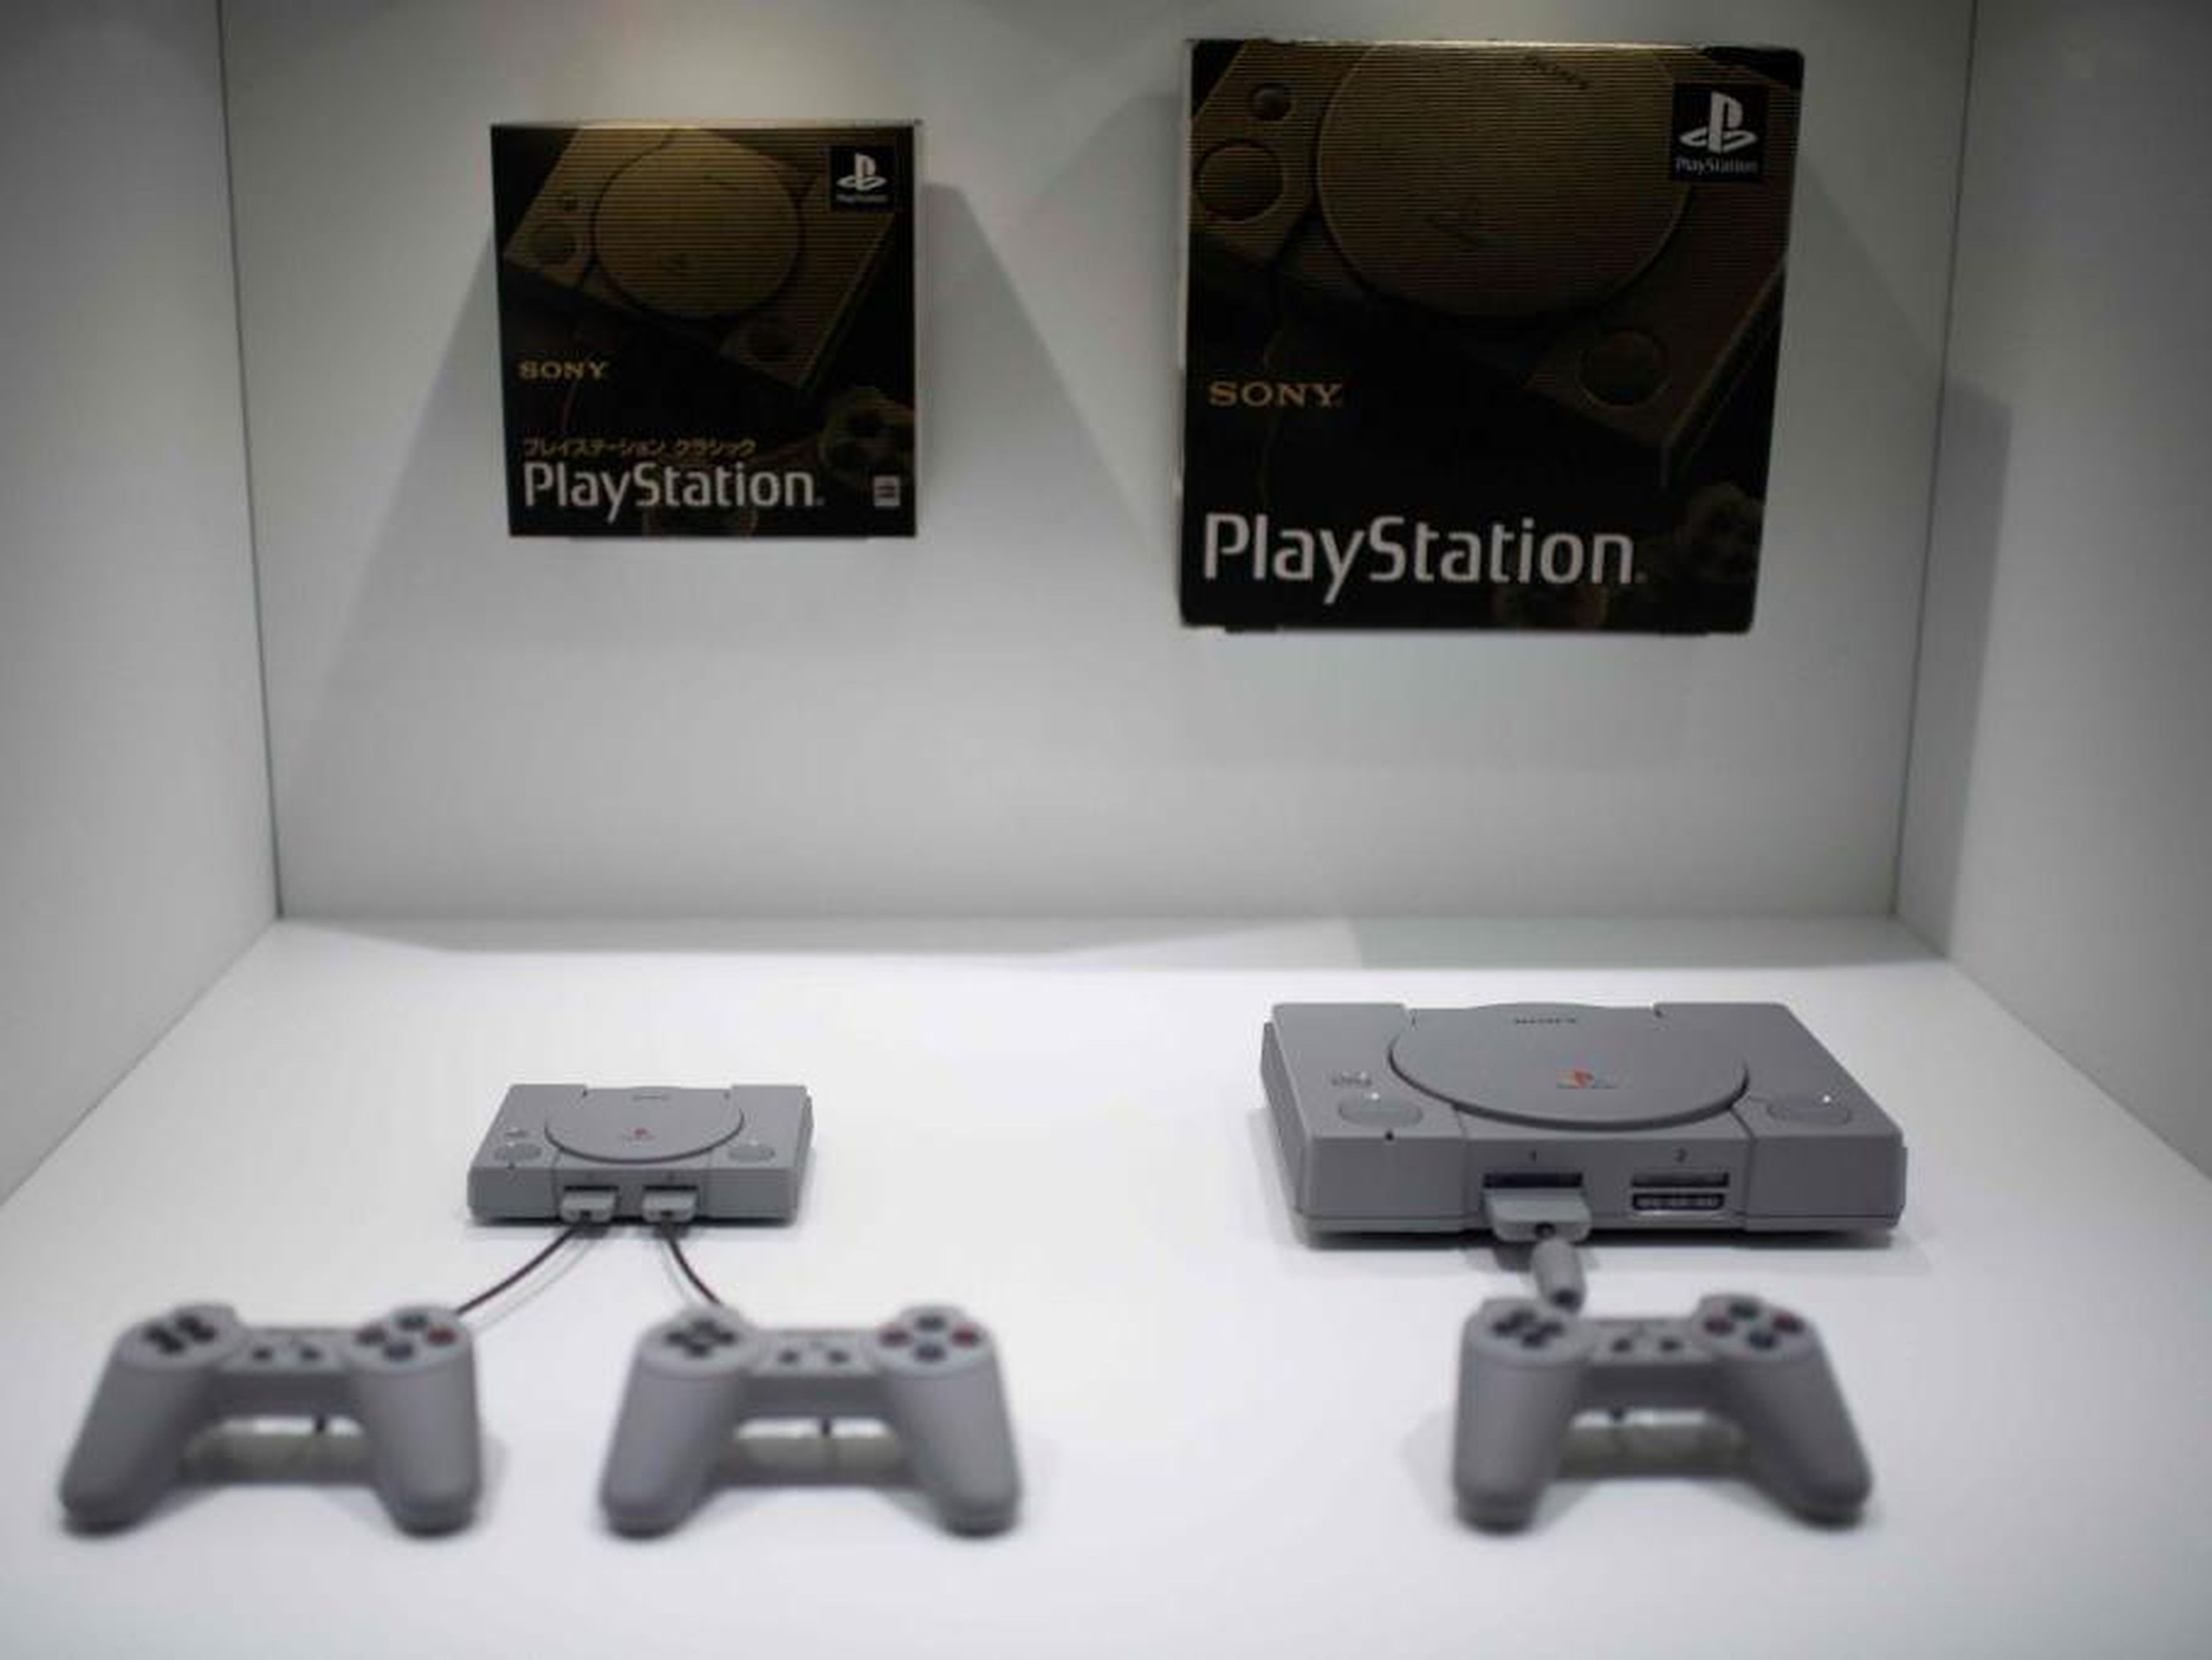 Sony's PlayStation was released nearly 25 years ago.